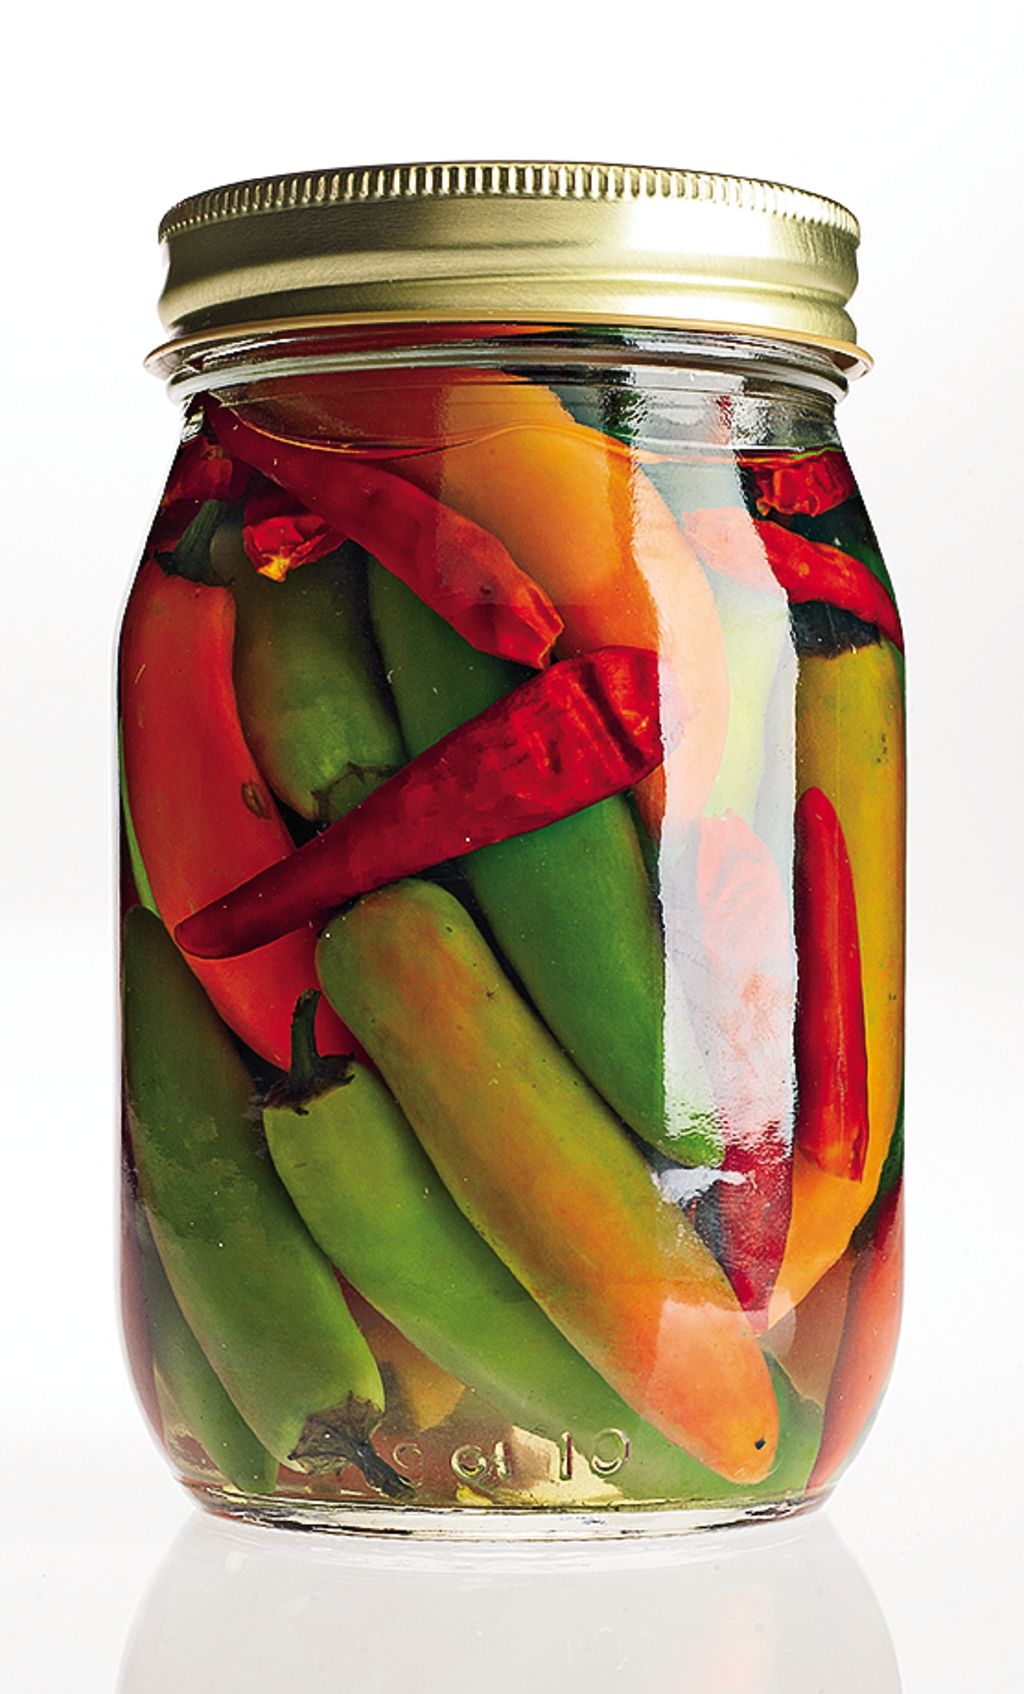 Pickling, Fluid, Produce, Food, Preserved food, Mason jar, Canning, Achaar, Food storage containers, Home accessories, 